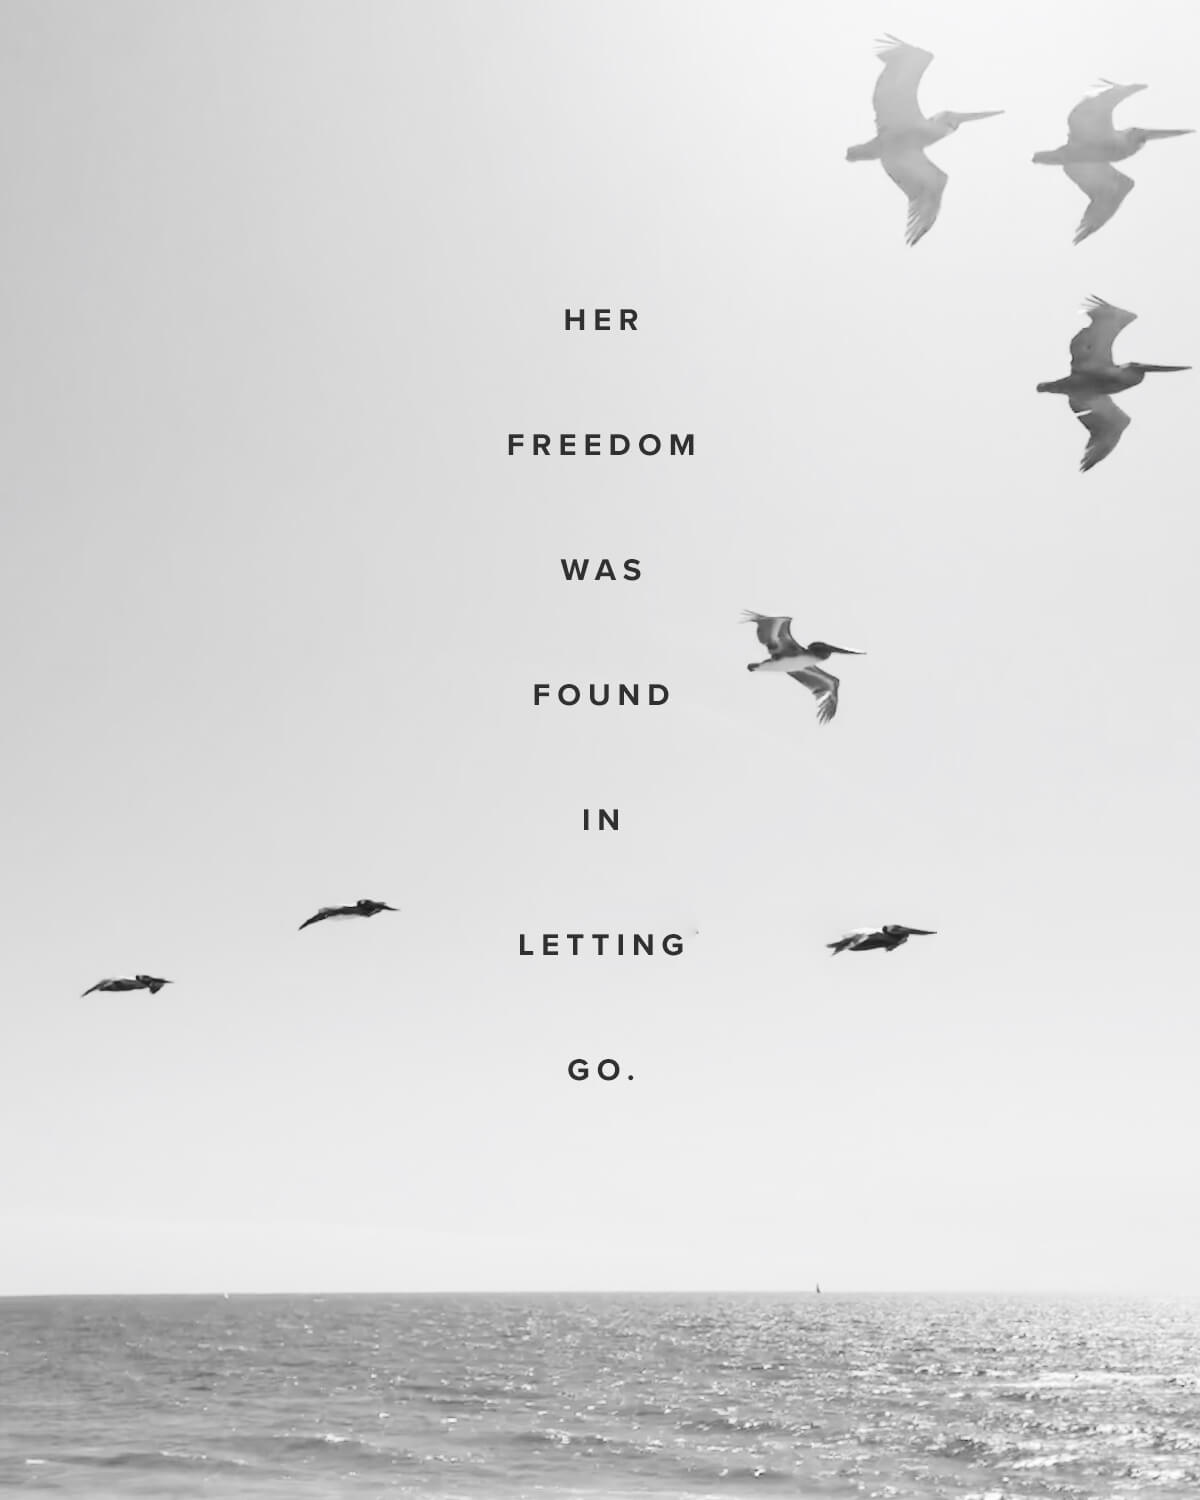 Her freedom was found in letting go